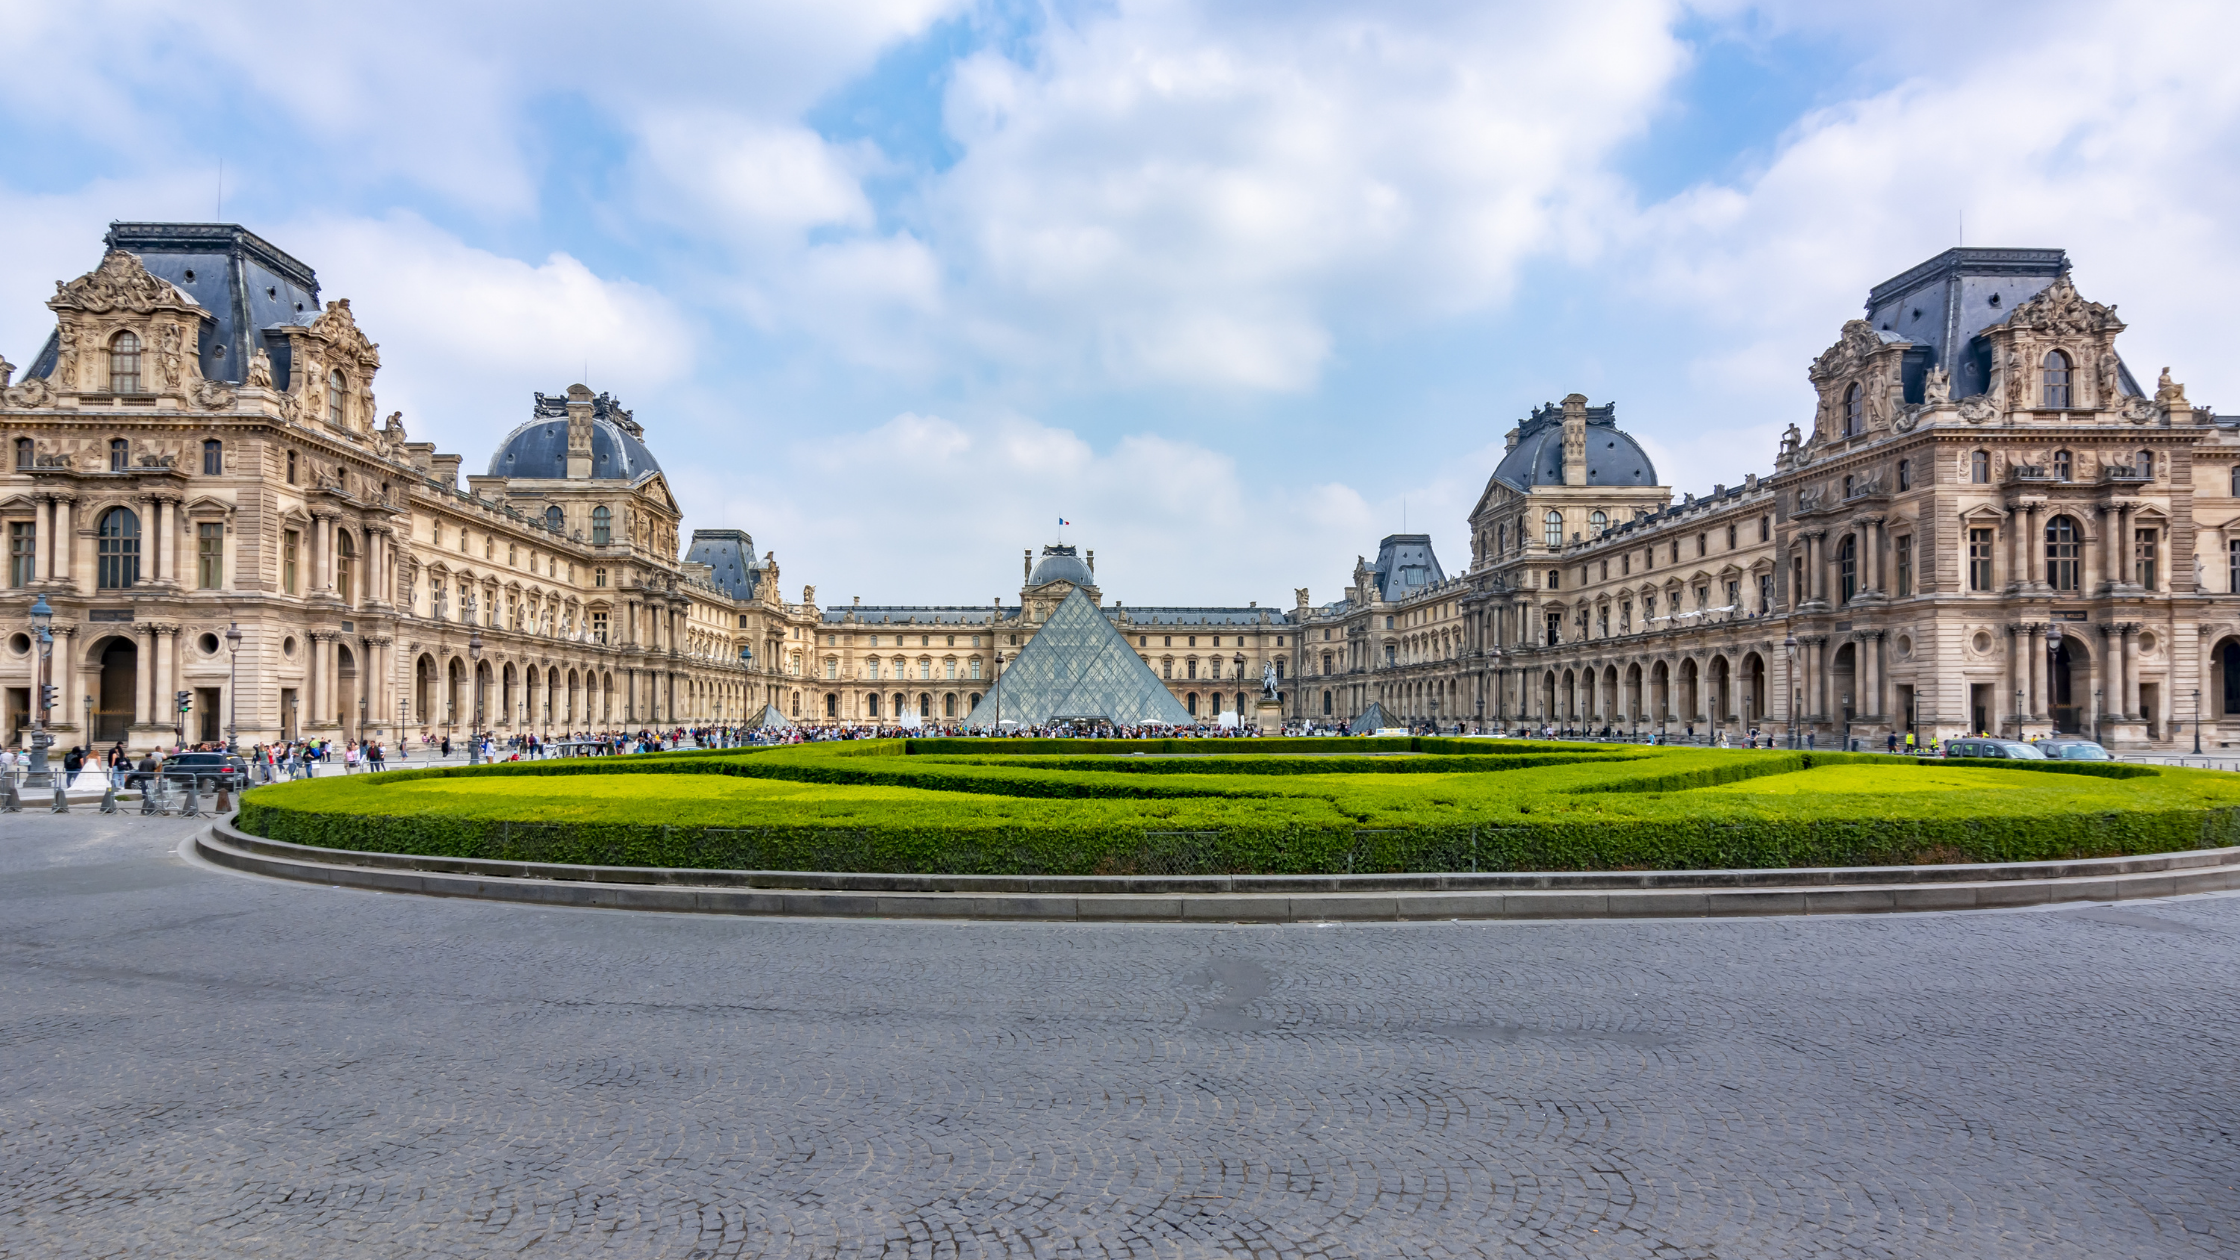 The Louvre - One of the most influential museums